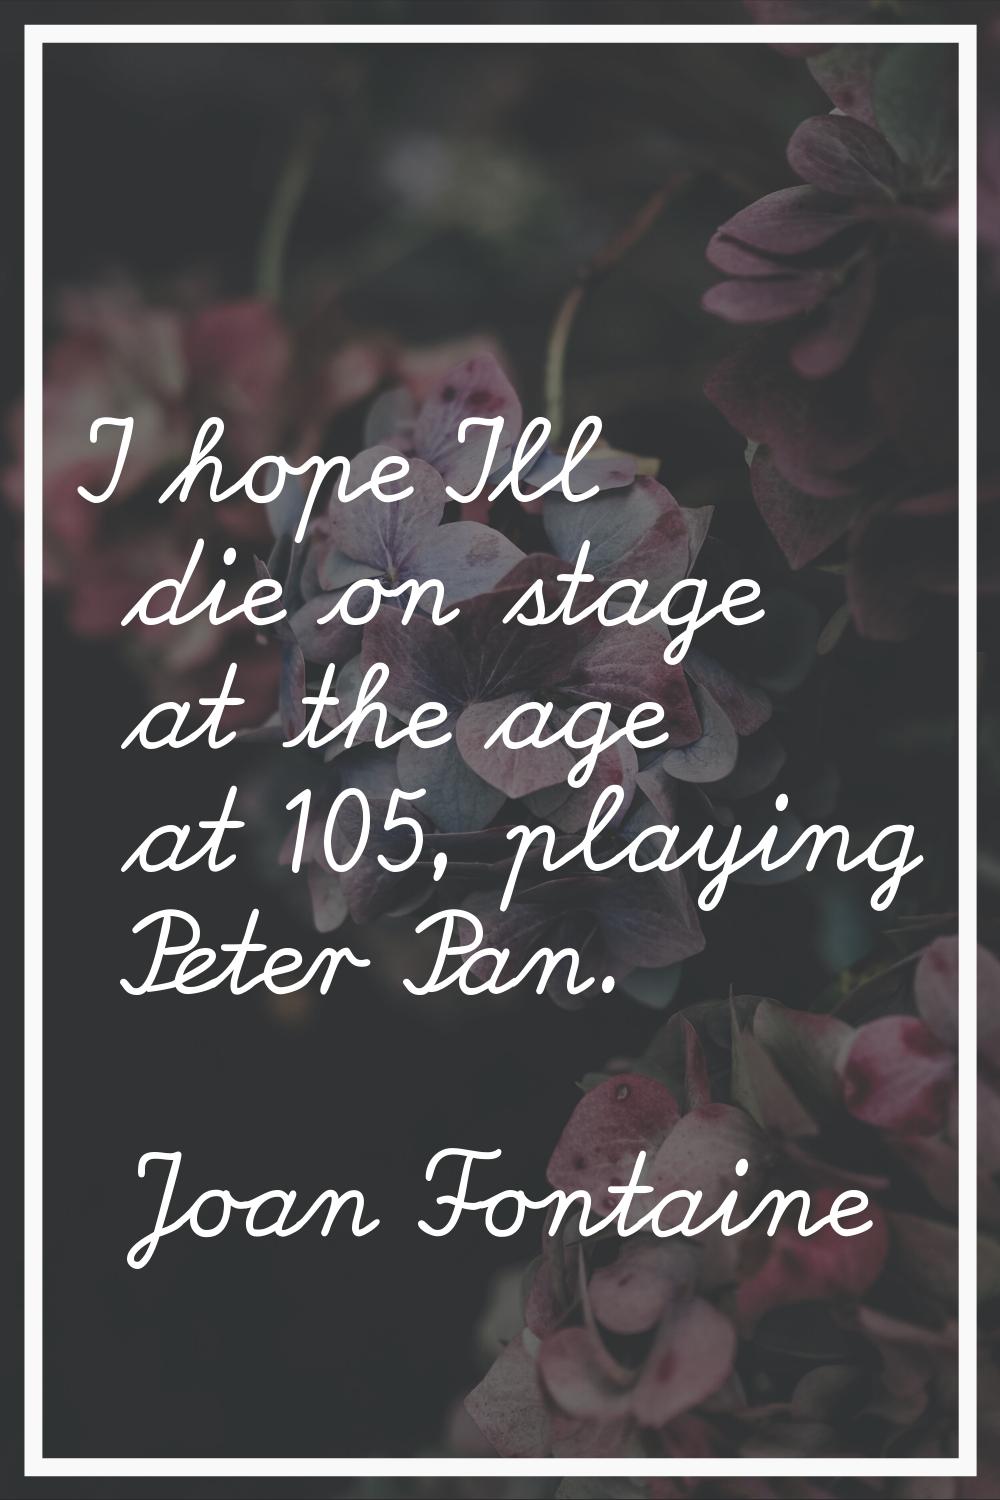 I hope I'll die on stage at the age at 105, playing Peter Pan.